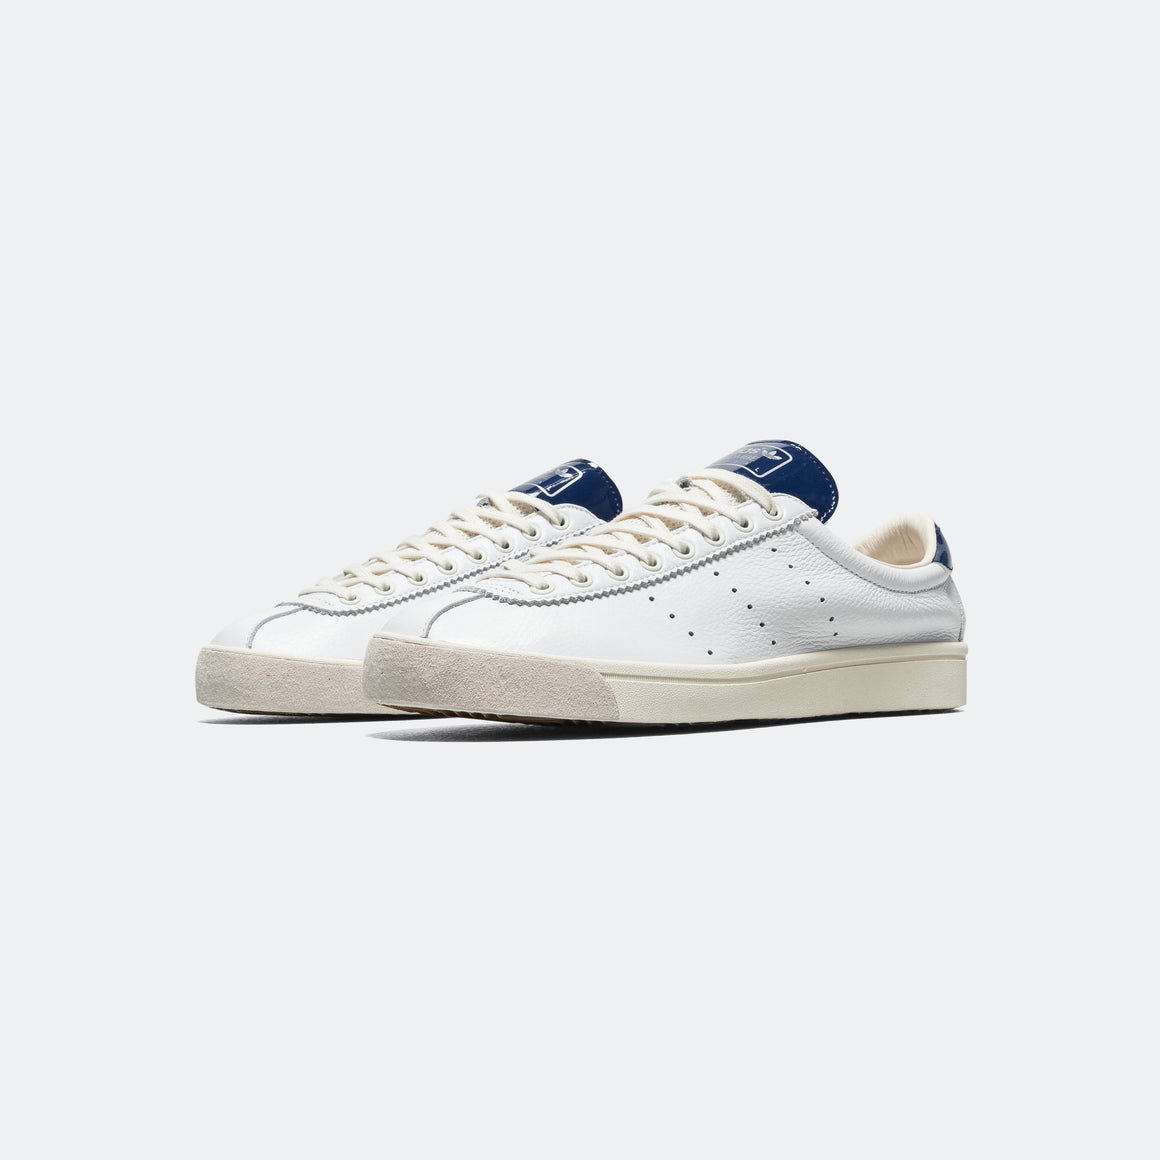 adidas - Lacombe Spzl - Core White/Collegiate Navy - UP THERE